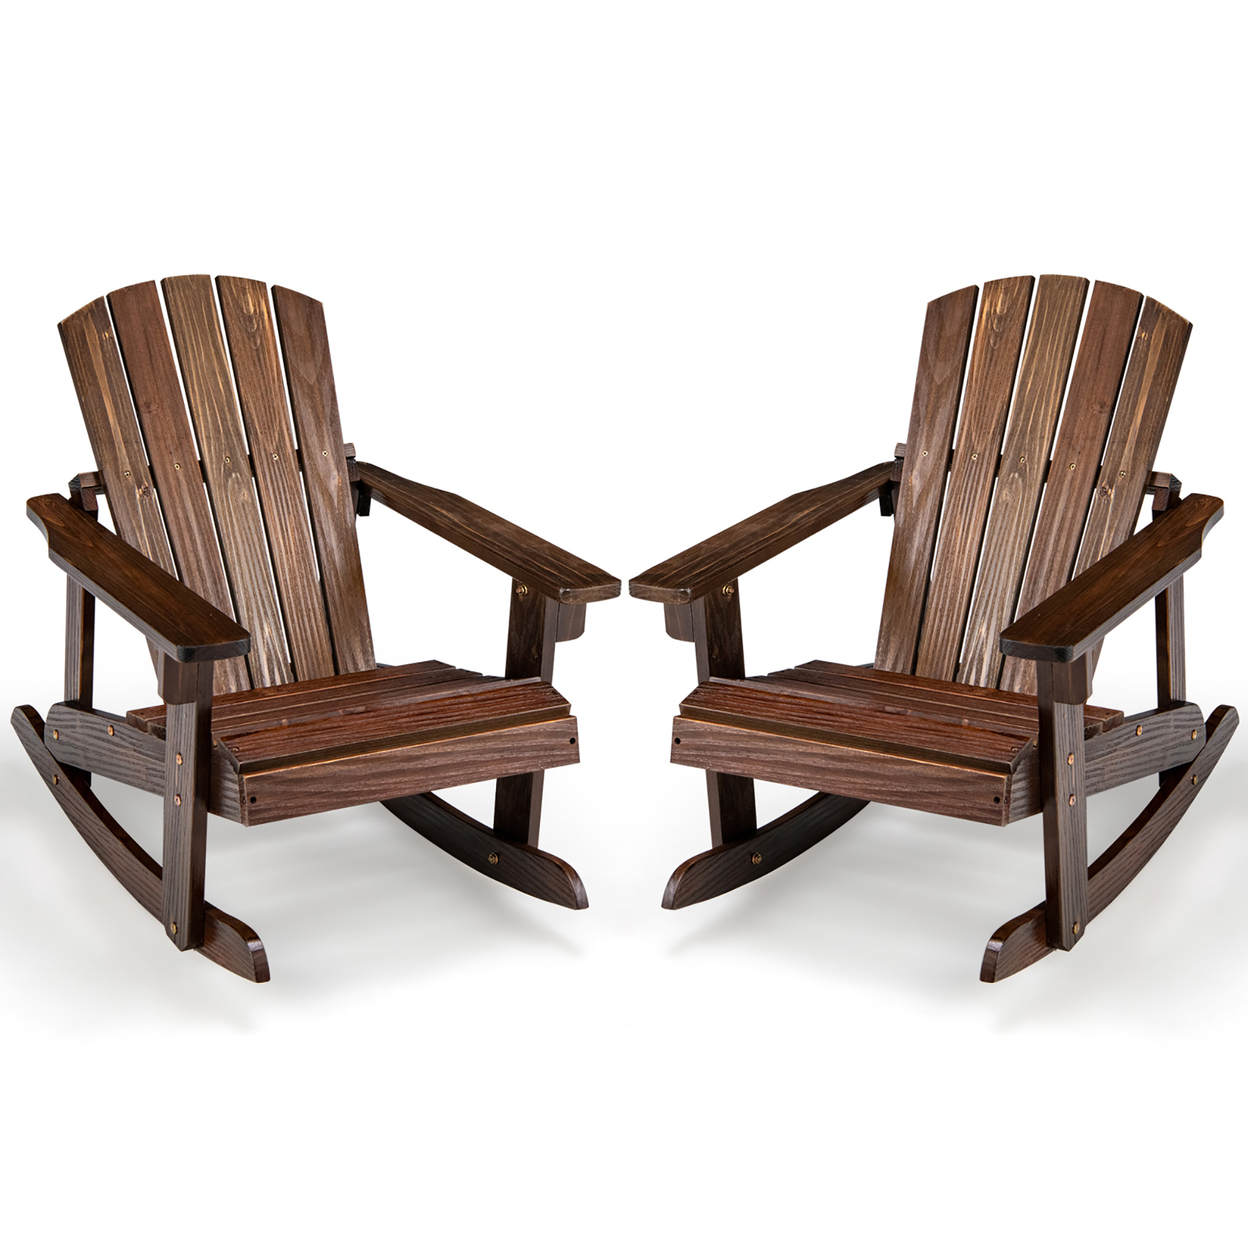 2PCS Kid Adirondack Rocking Chair Outdoor Solid Wood Slatted Seat Backrest - Coffee